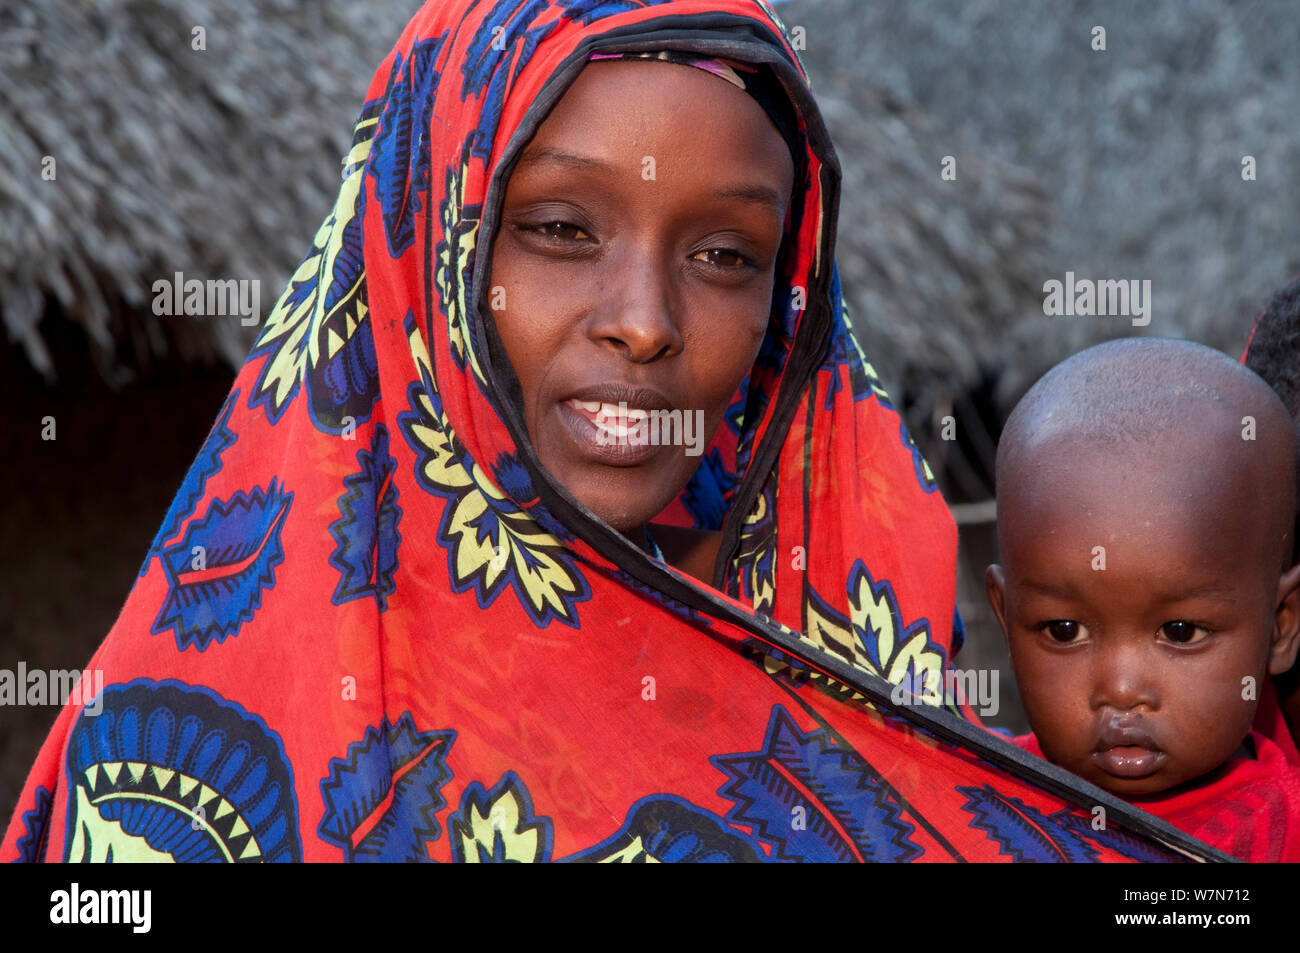 Daughter-in-law of village chief, Orma village, pastoralist tribe living in Tana River delta, Kenya, East Africa 2010 Stock Photo